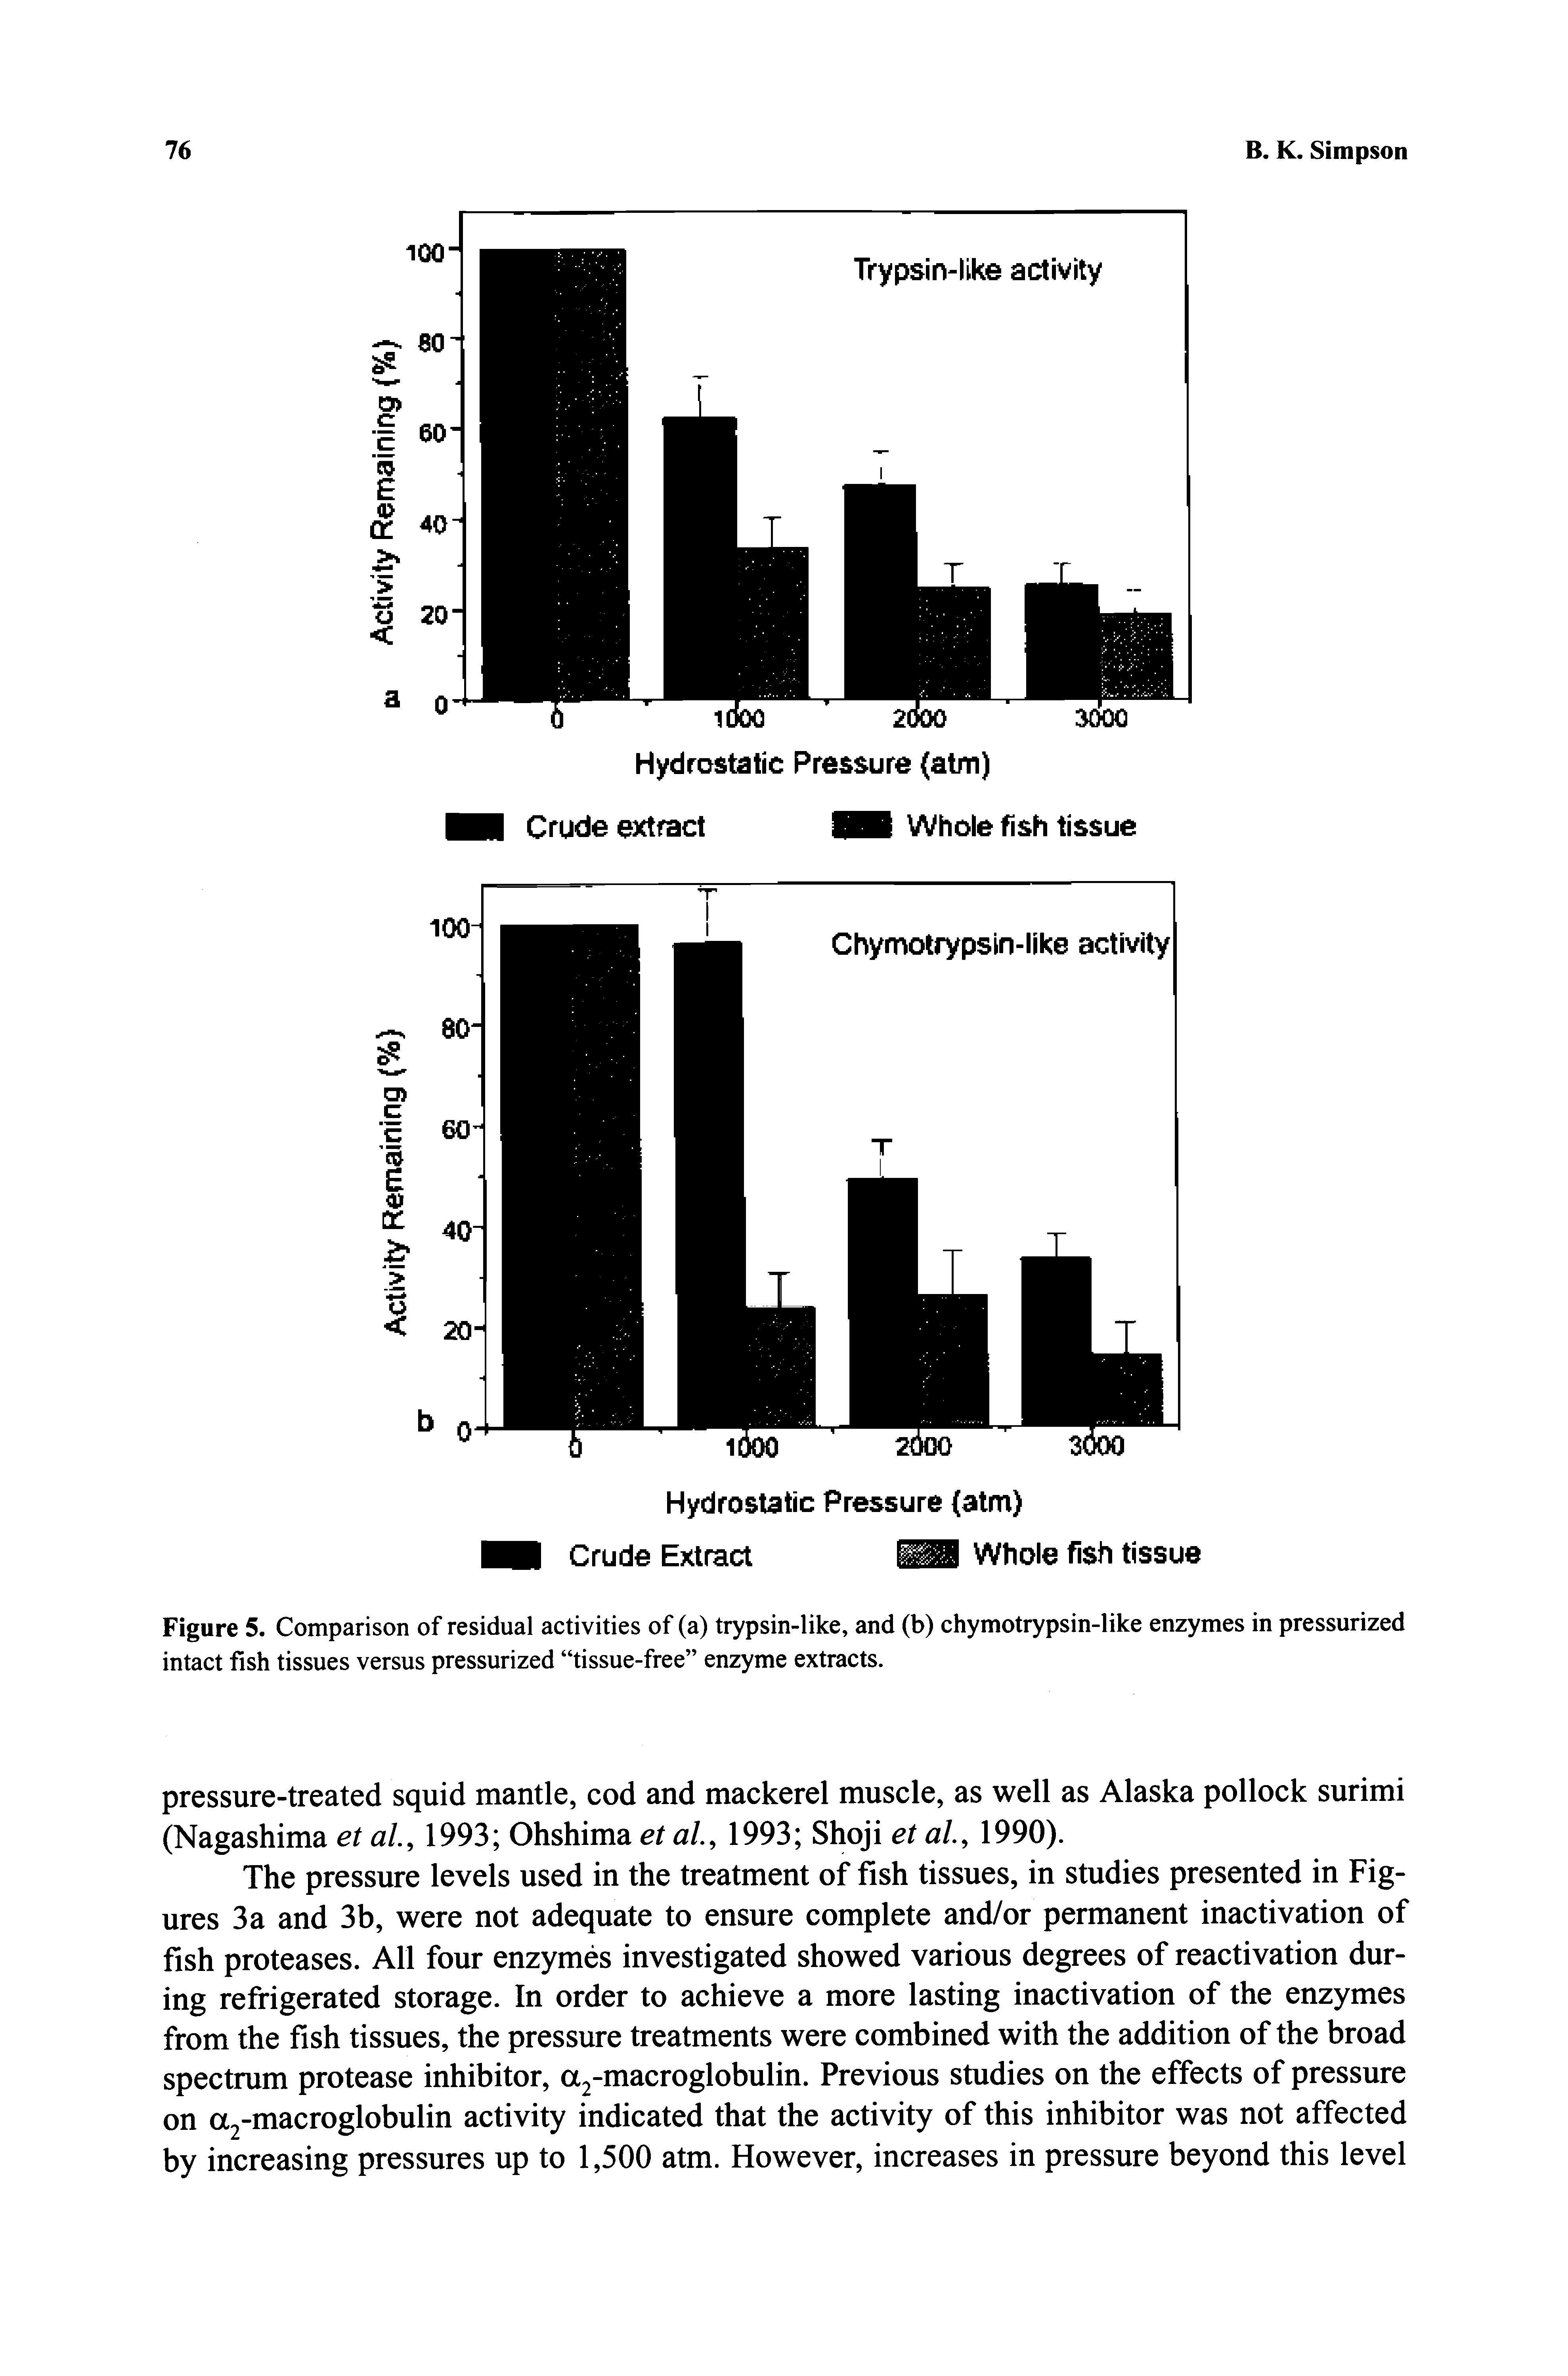 Figure 5. Comparison of residual activities of (a) trypsin-like, and (b) chymotrypsin-like enzymes in pressurized intact fish tissues versus pressurized tissue-free enzyme extracts.